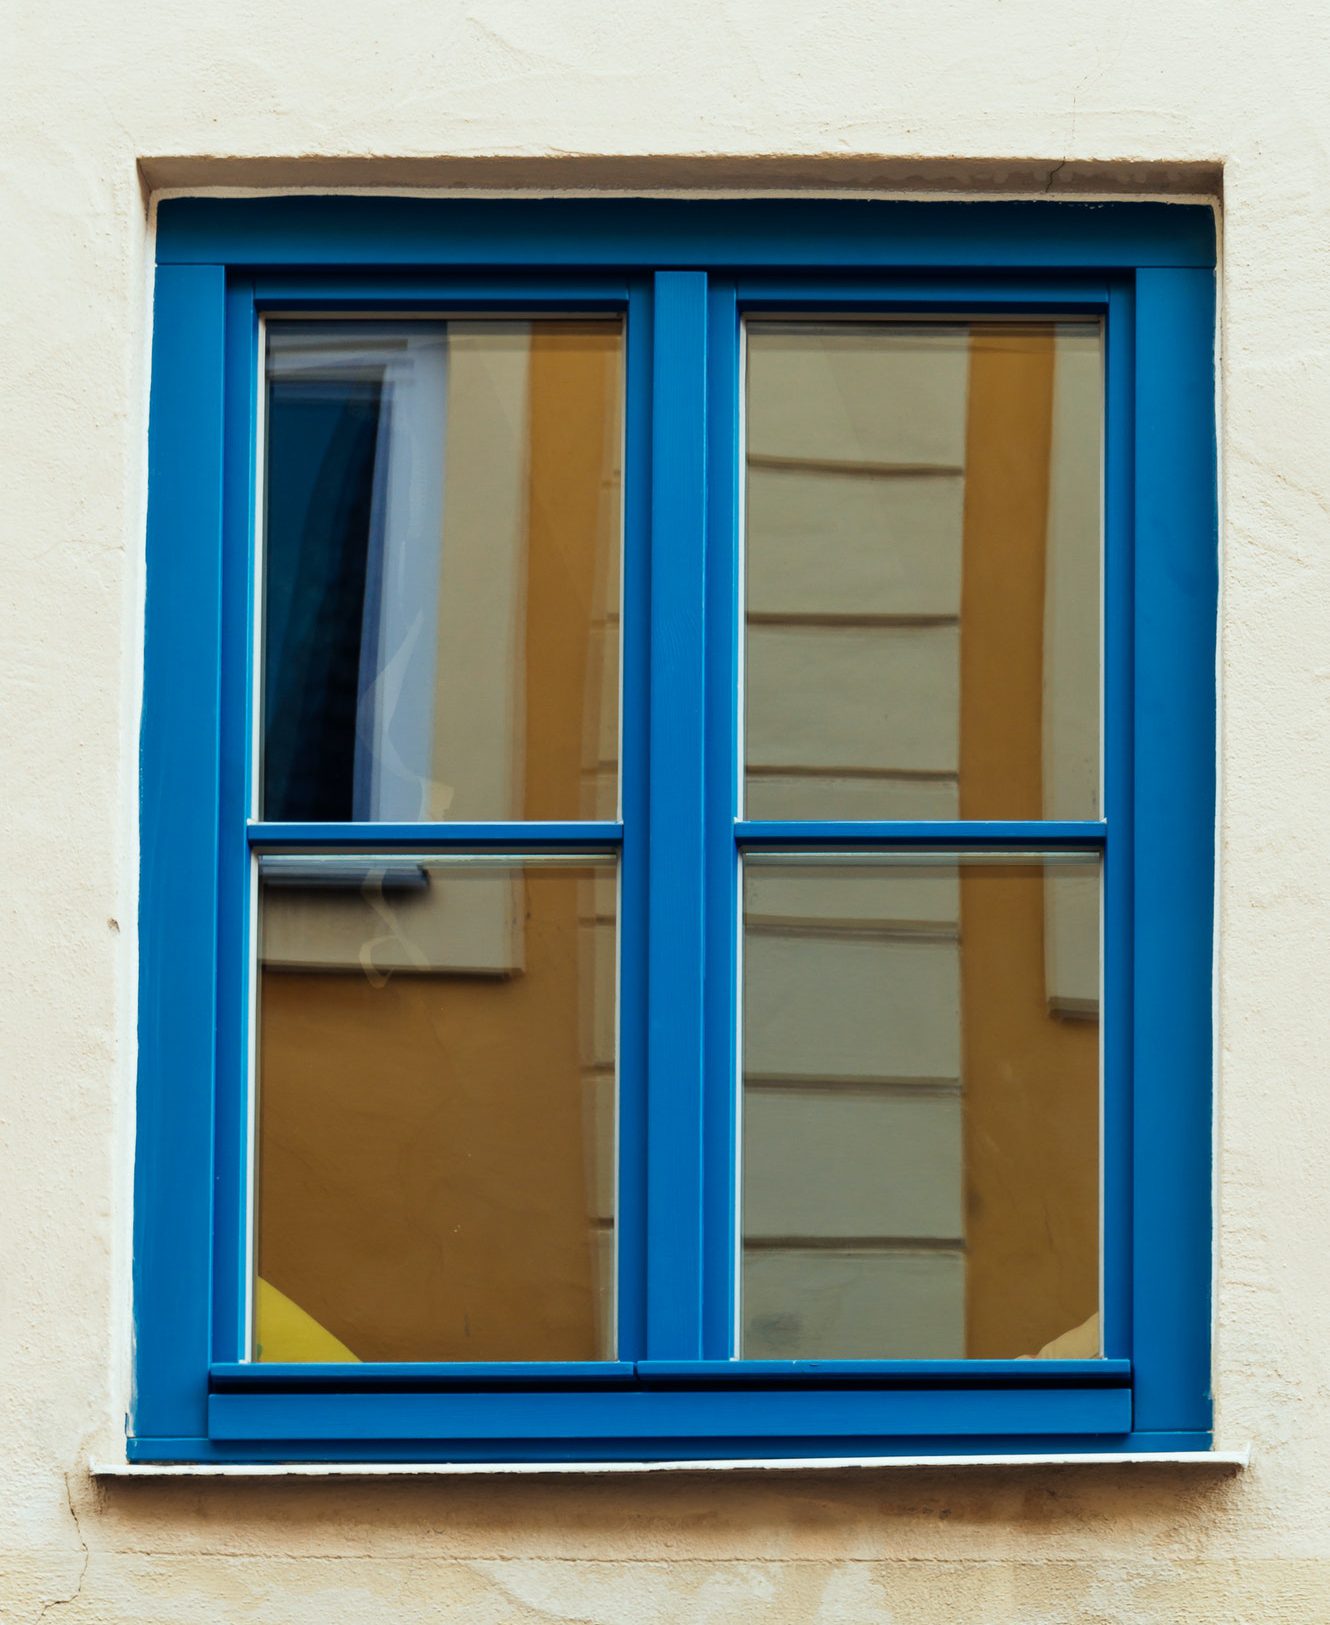 Wooden window painted in blue and building reflections on glass